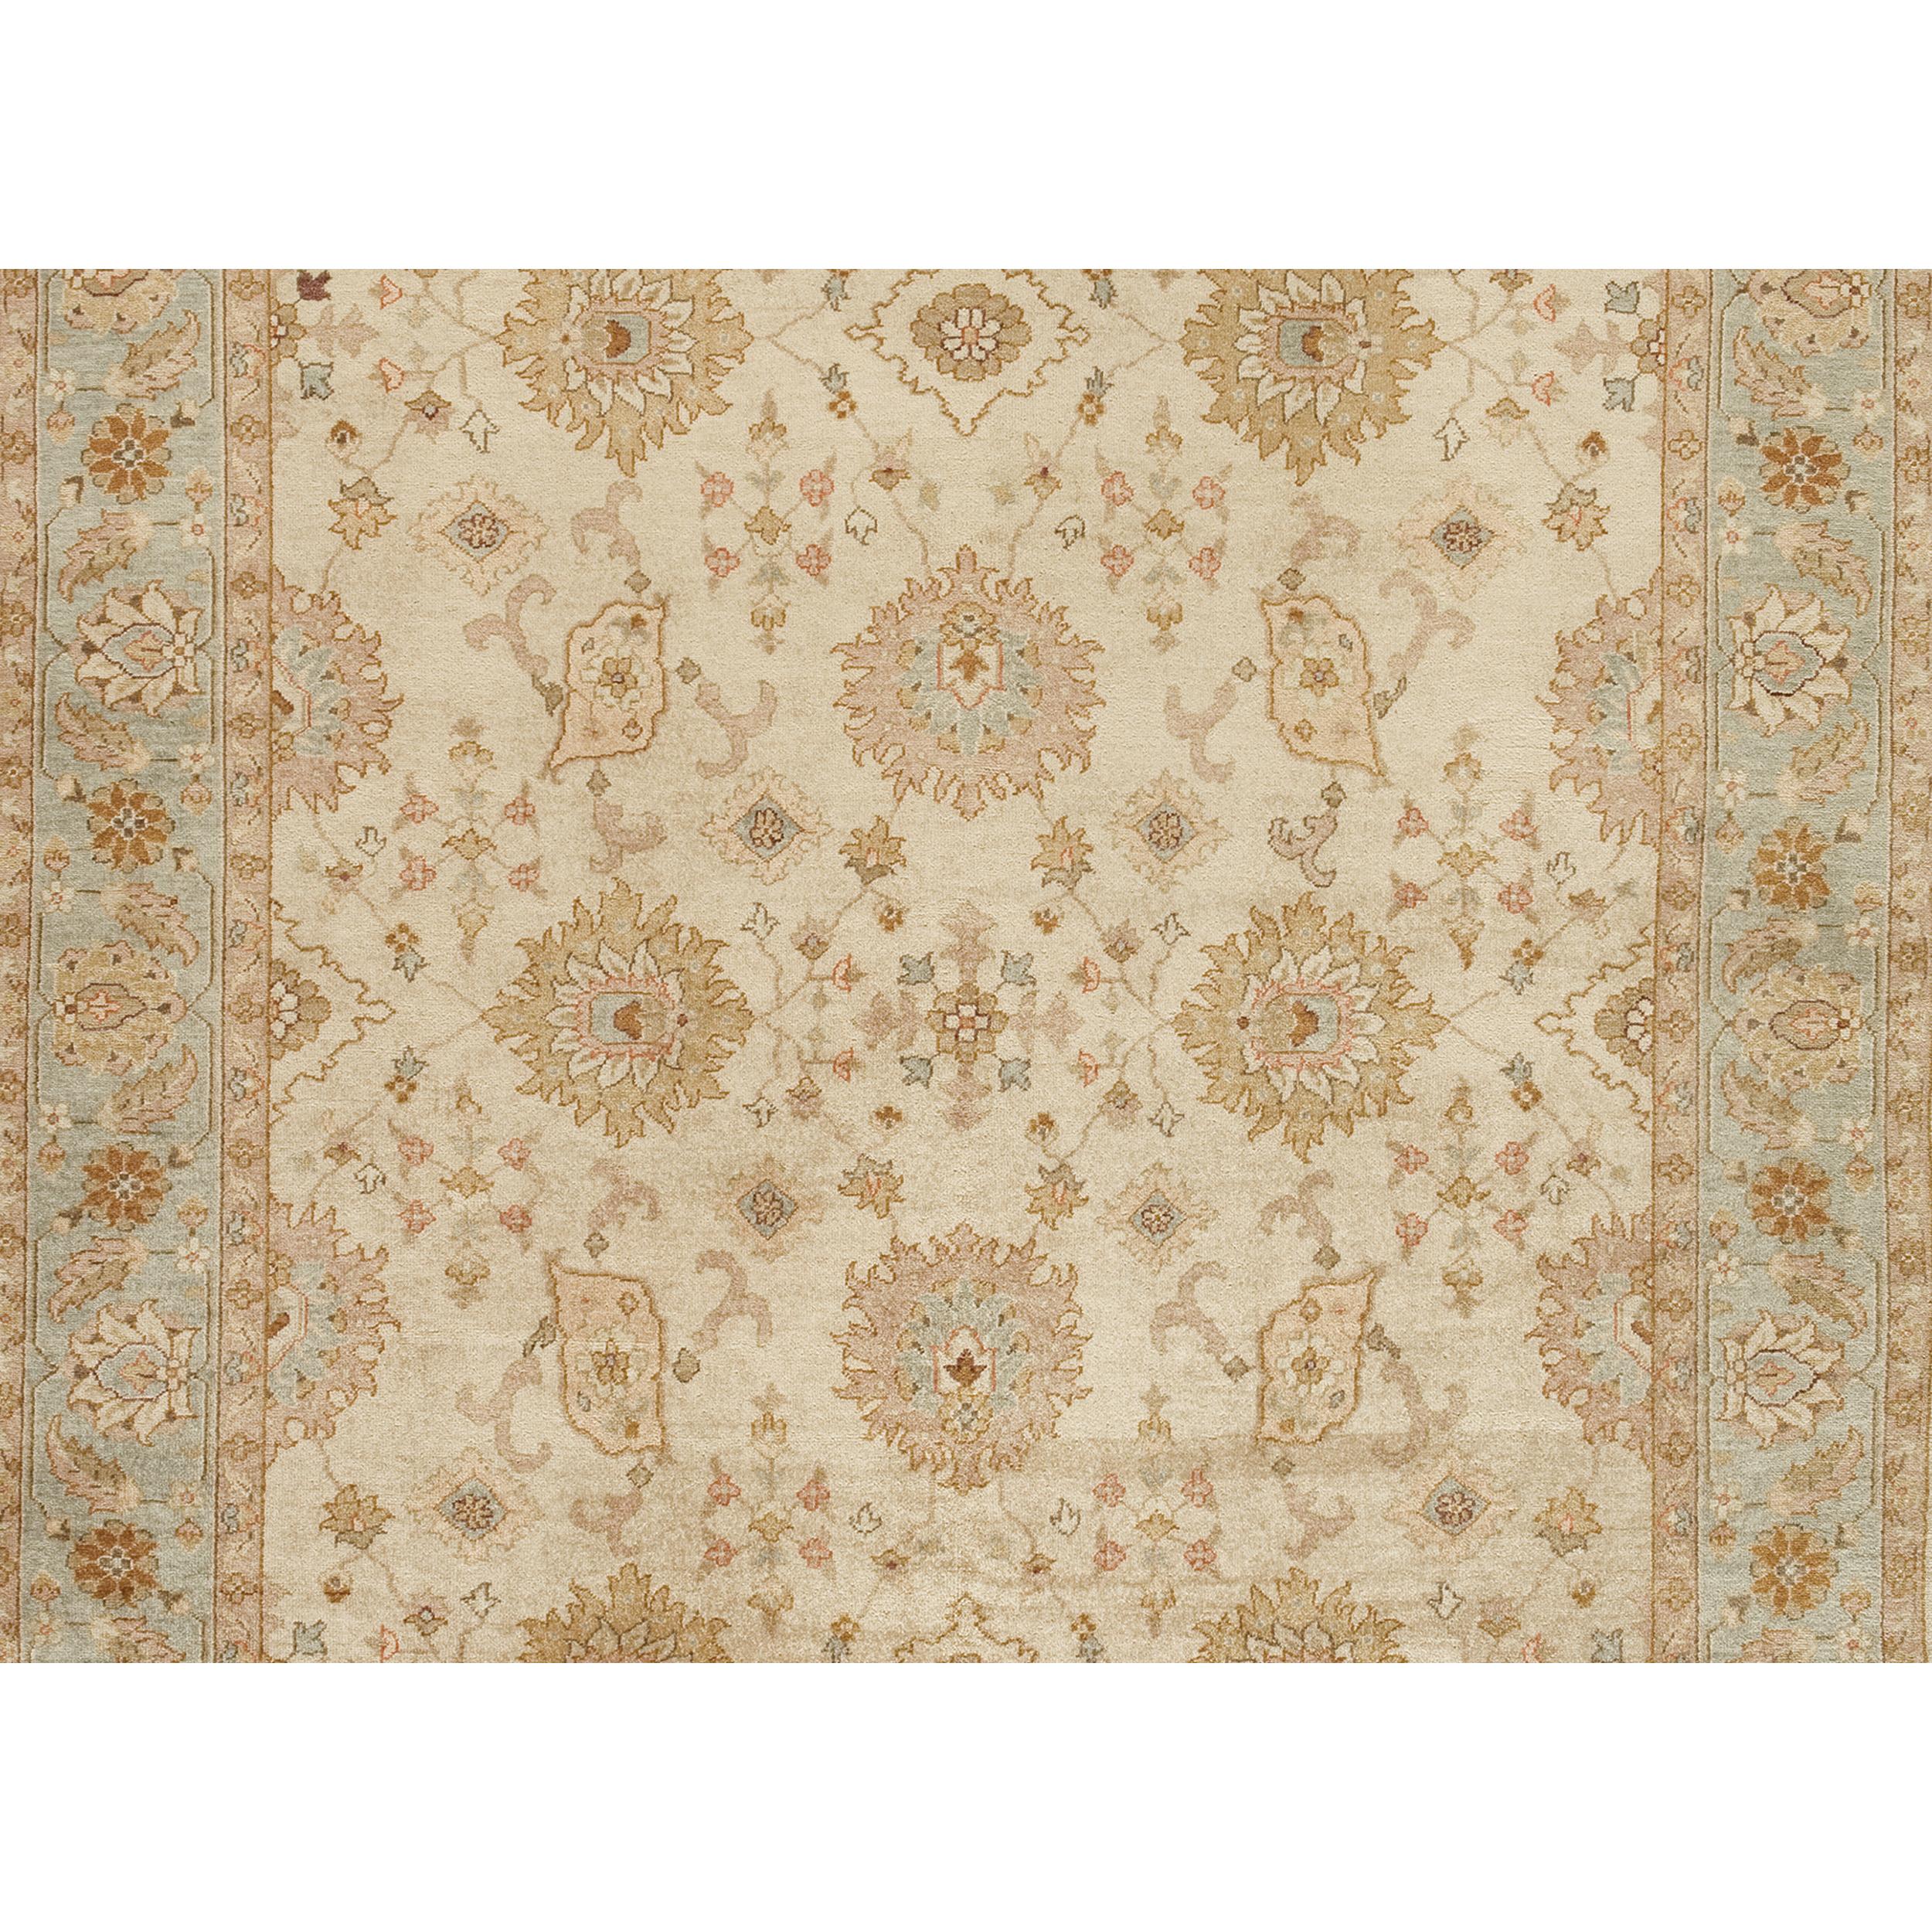 Chinese Luxury Traditional Hand-Knotted Ivory/Seafoam 10x14 Rug For Sale